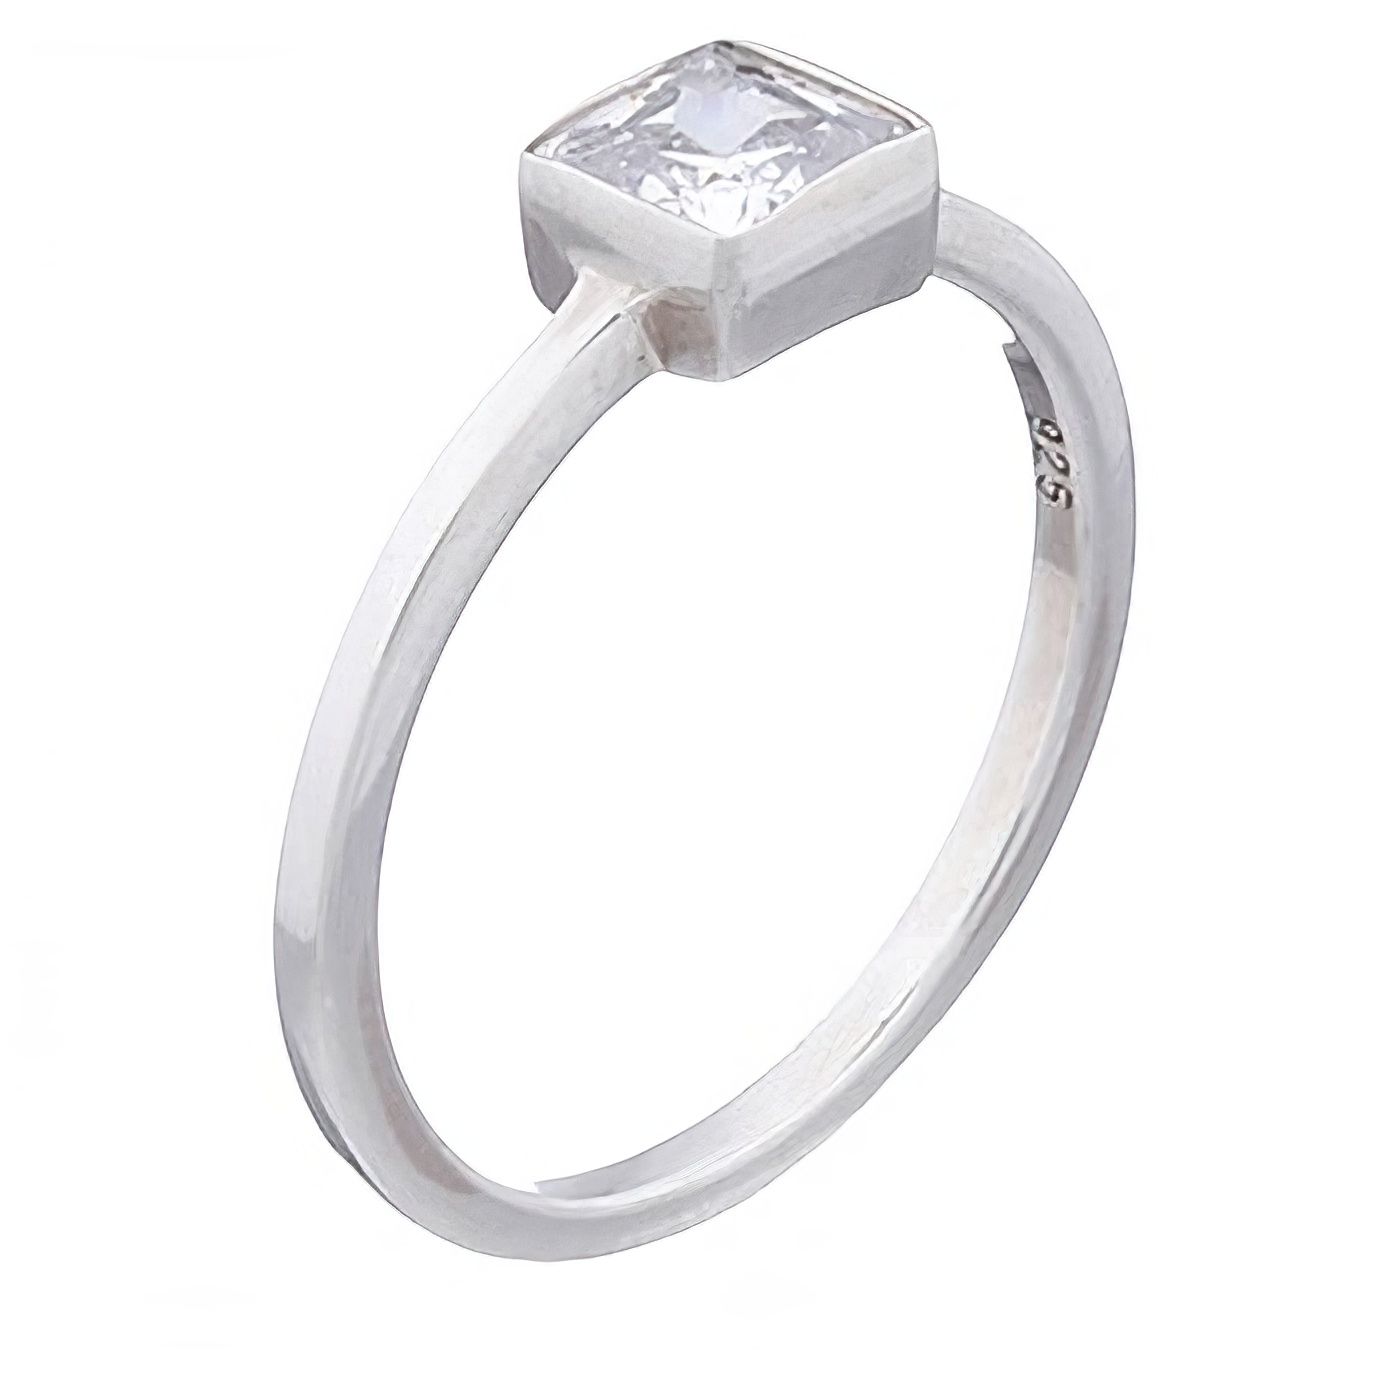 925 Silver Ring Clear Squared Cubic Zirconia Stone by BeYindi 